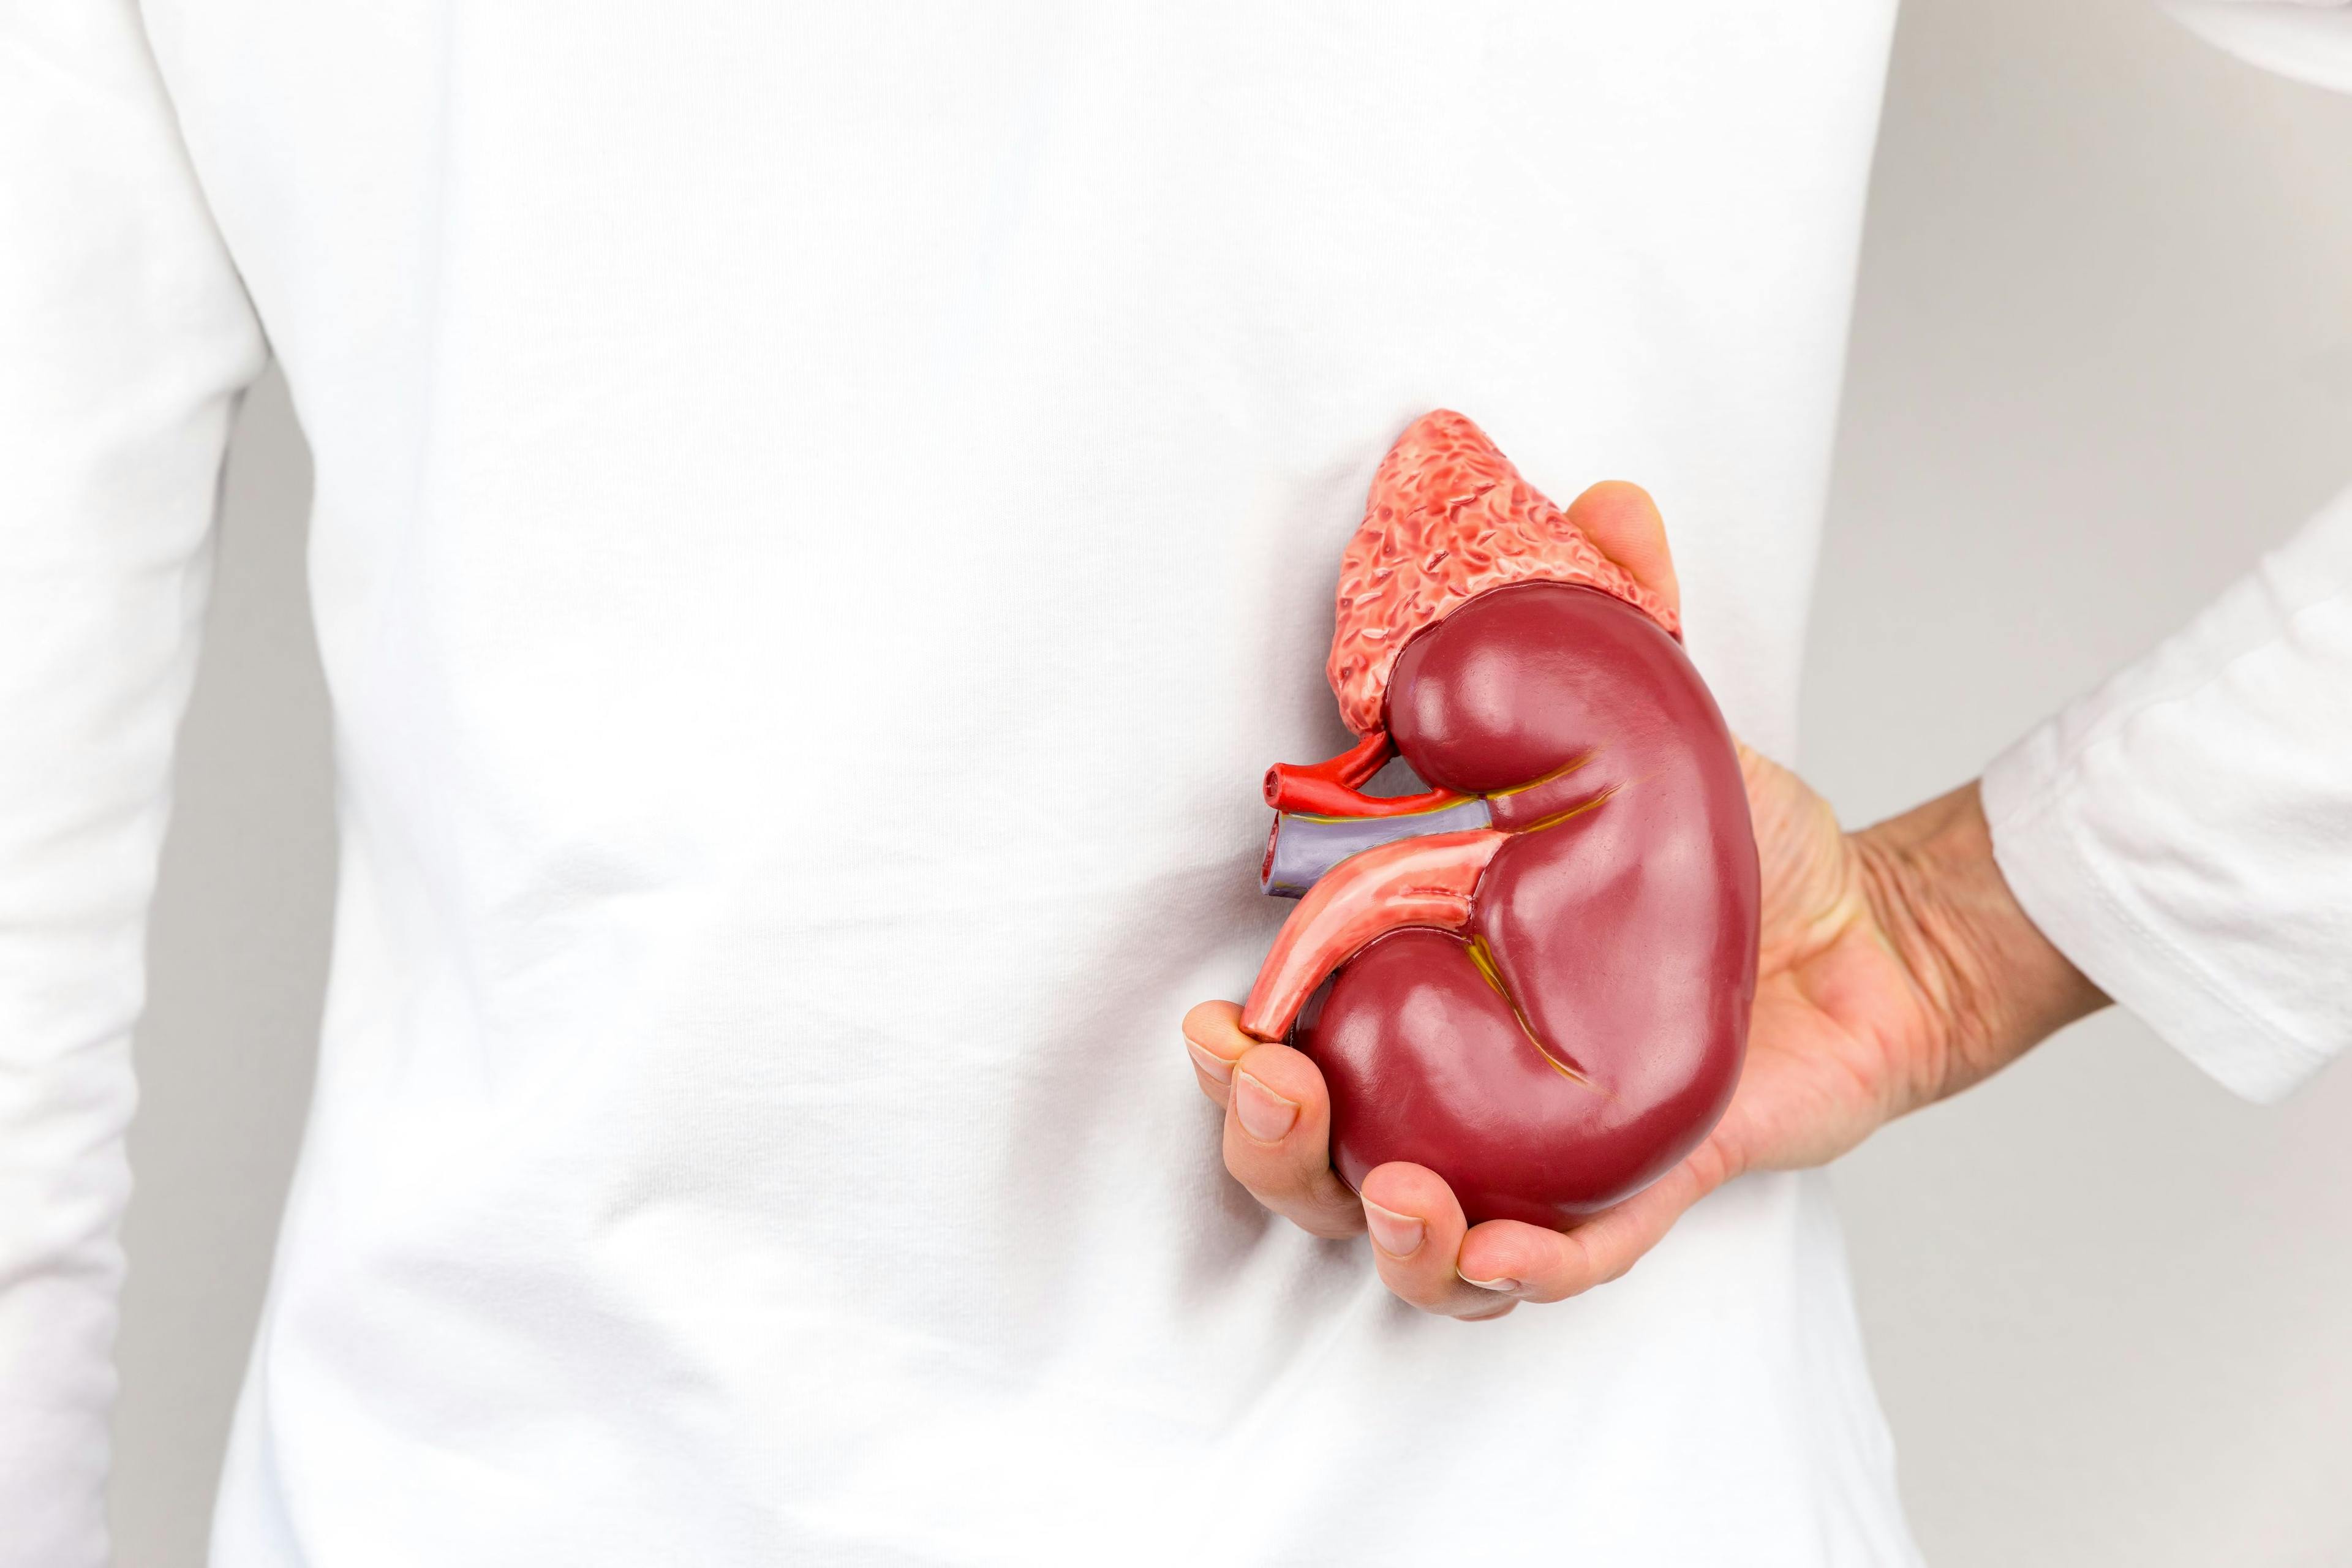 Health care professional holding model of a kidney -- Image credit: benschonewille | stock.adobe.com